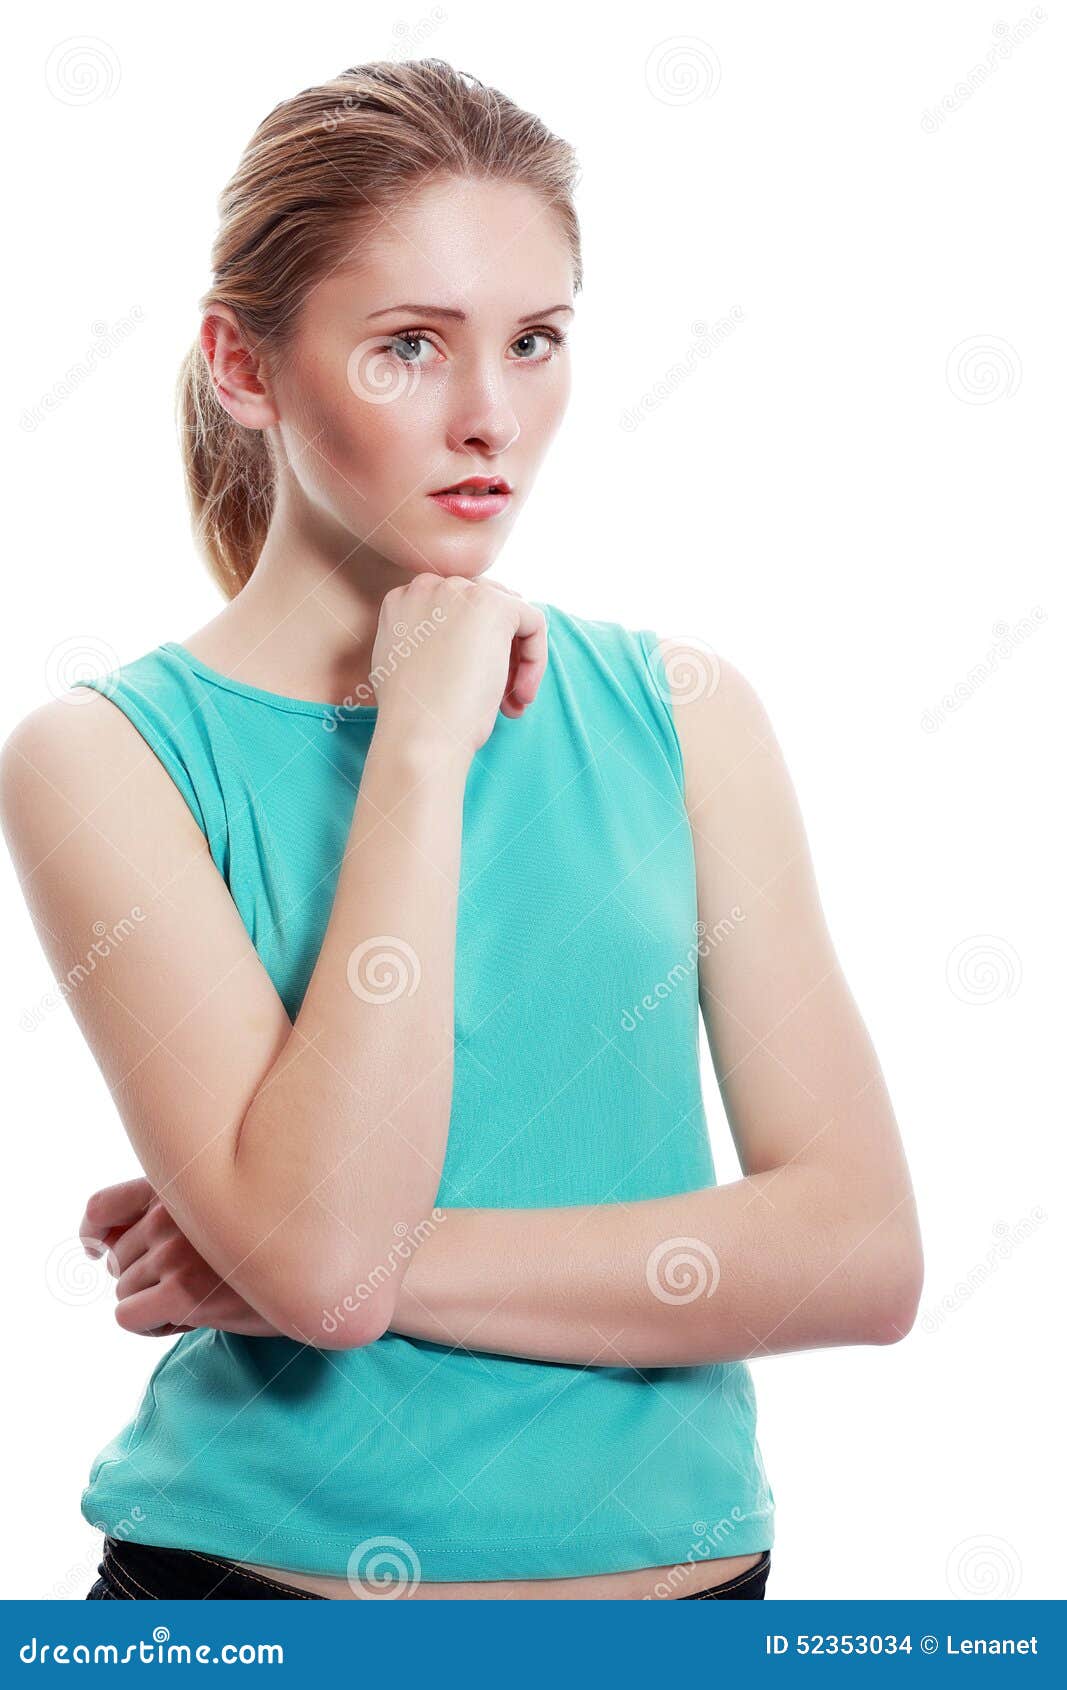 Displeased woman stock photo. Image of envy, alone, employee - 52353034